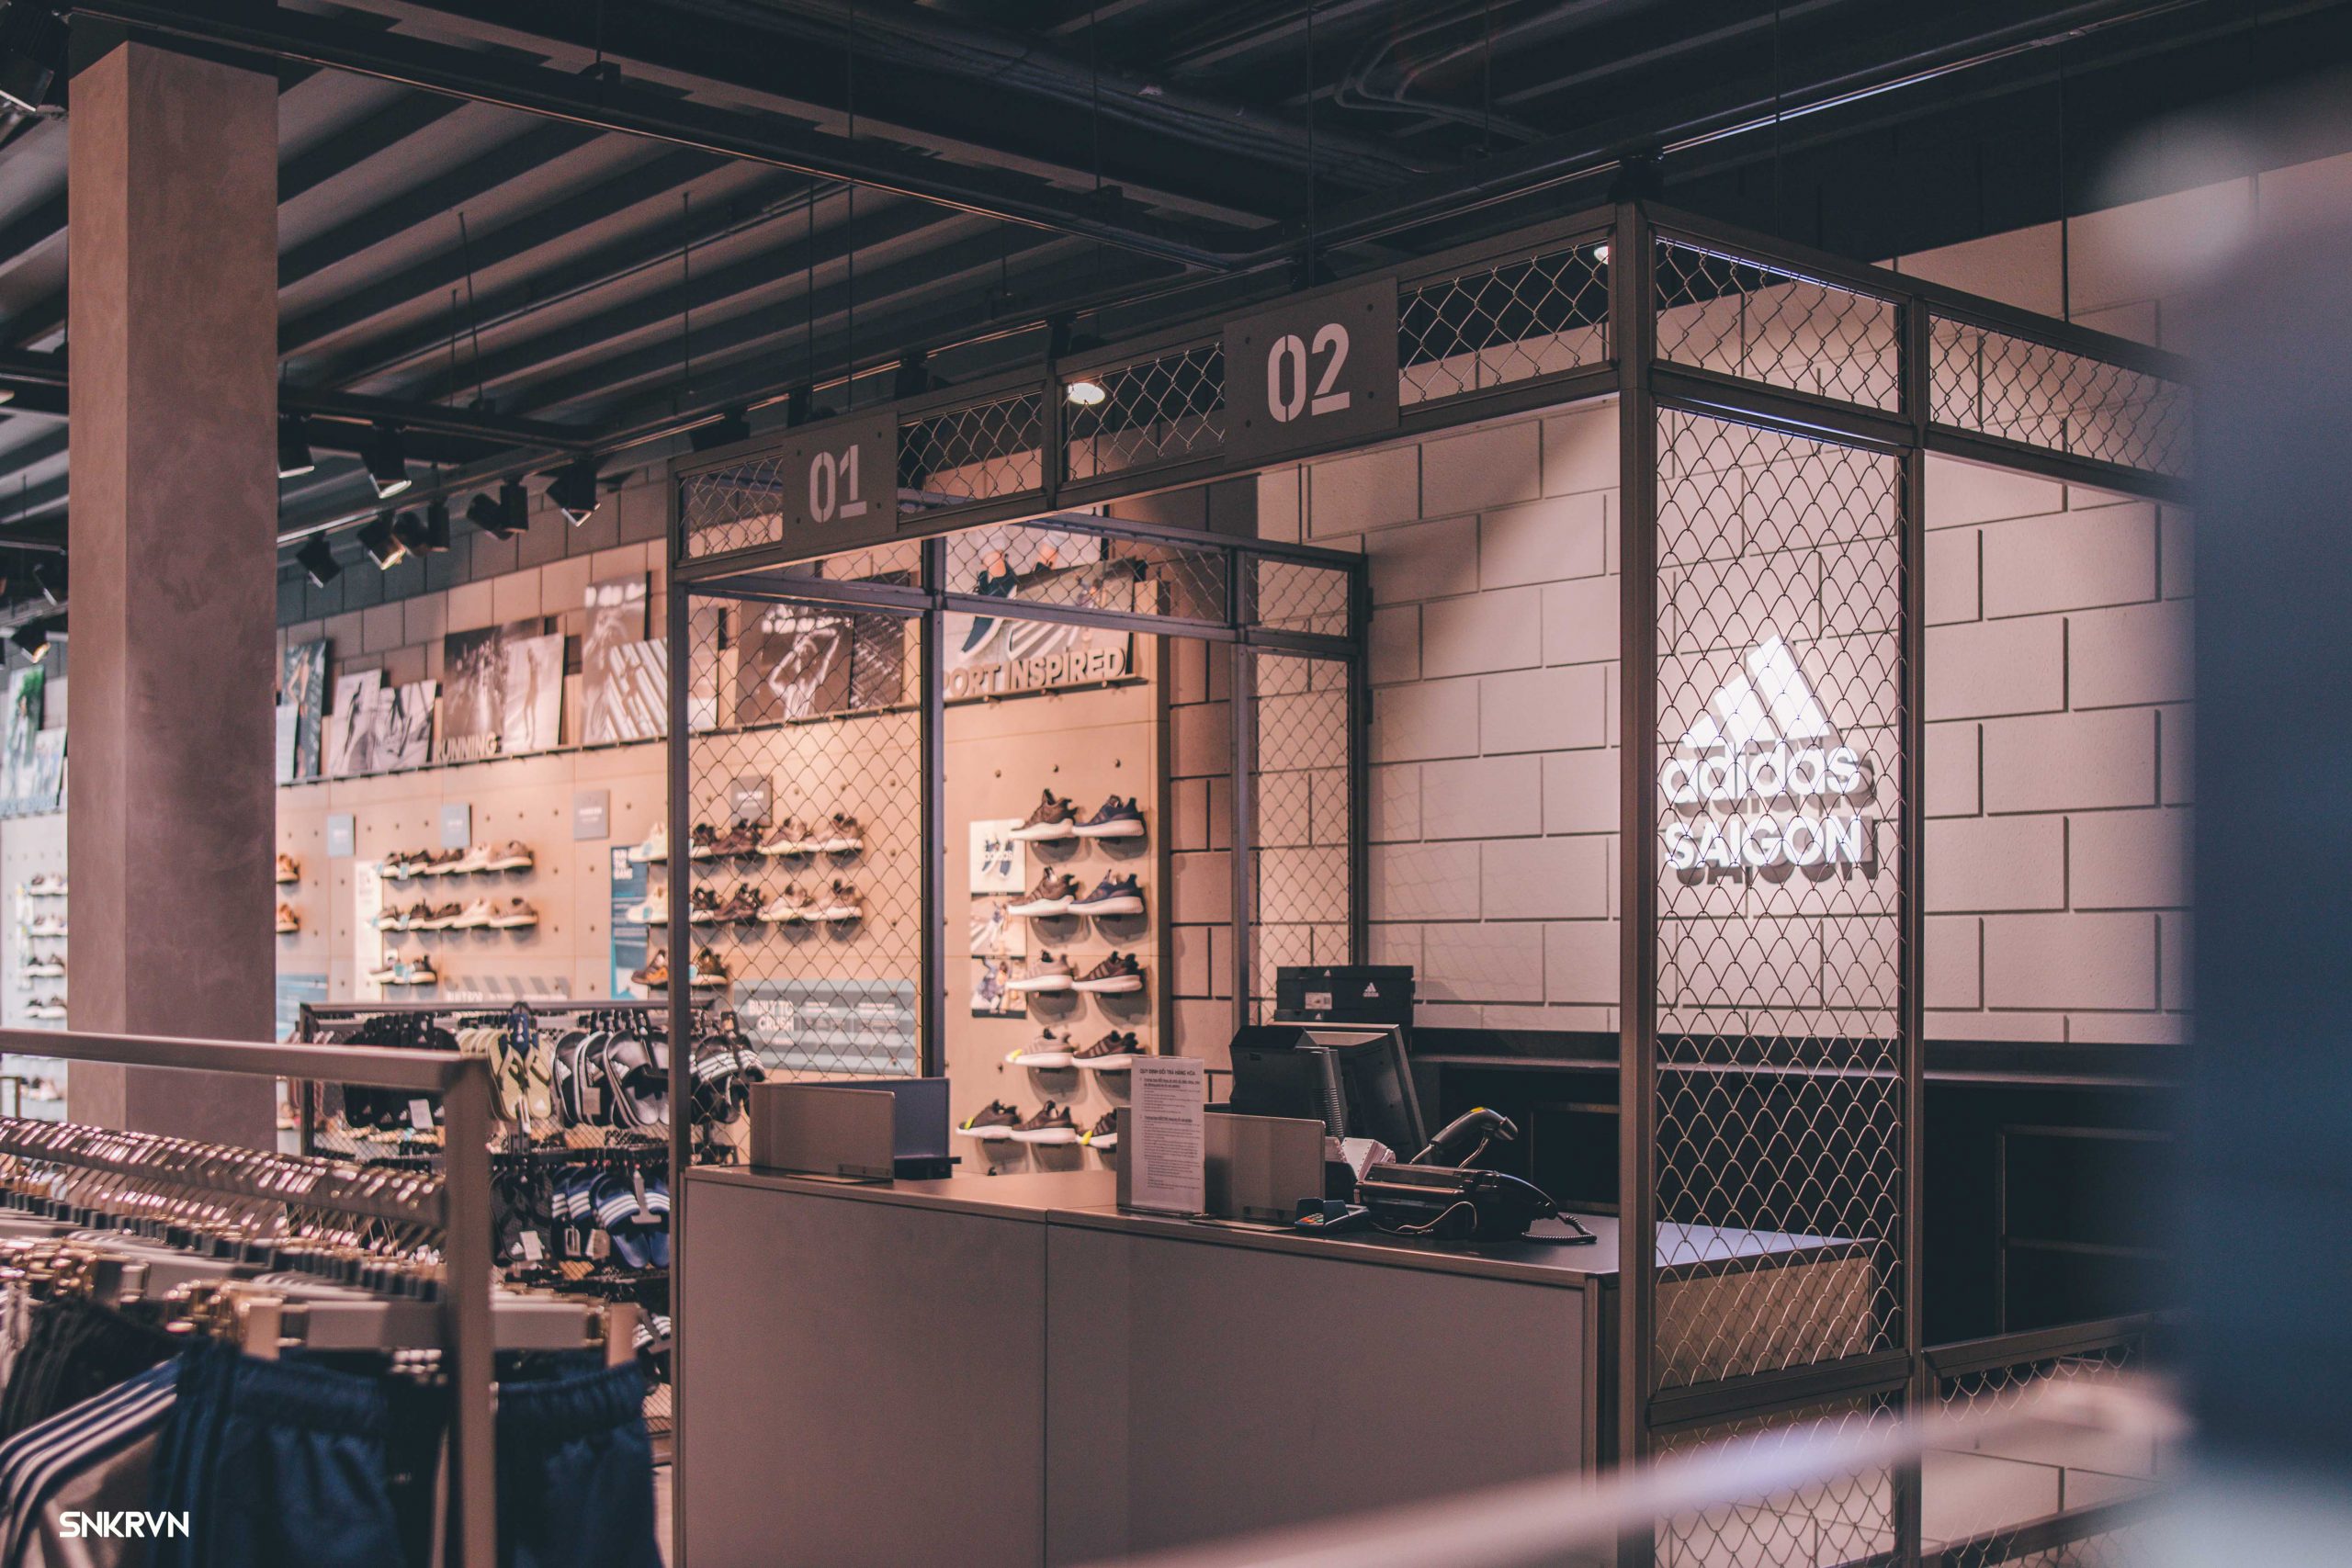 The opening event of adidas store on Le Van Sy street (July 27, 2018)